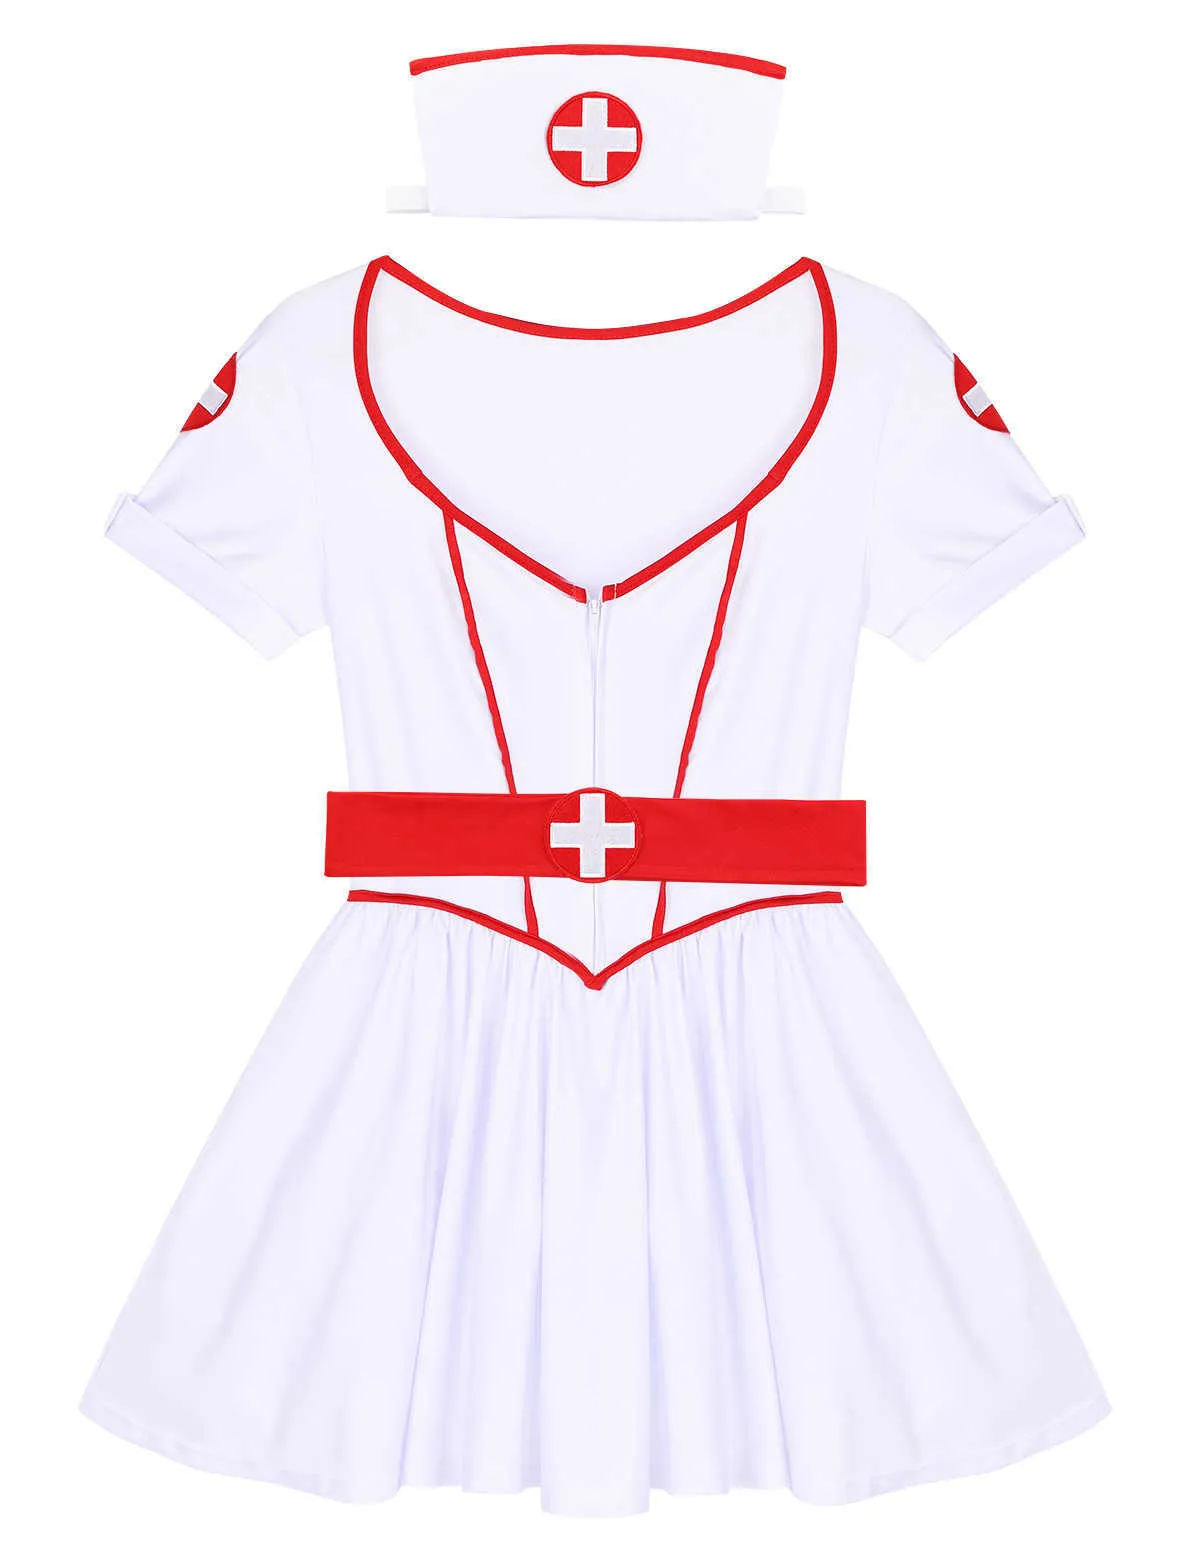 Women Adults Naughty Nurse Cosplay Costume Halloween Party Outfit Sweetheart Neckline Tutu Dress with Headband and Belt G09259318708